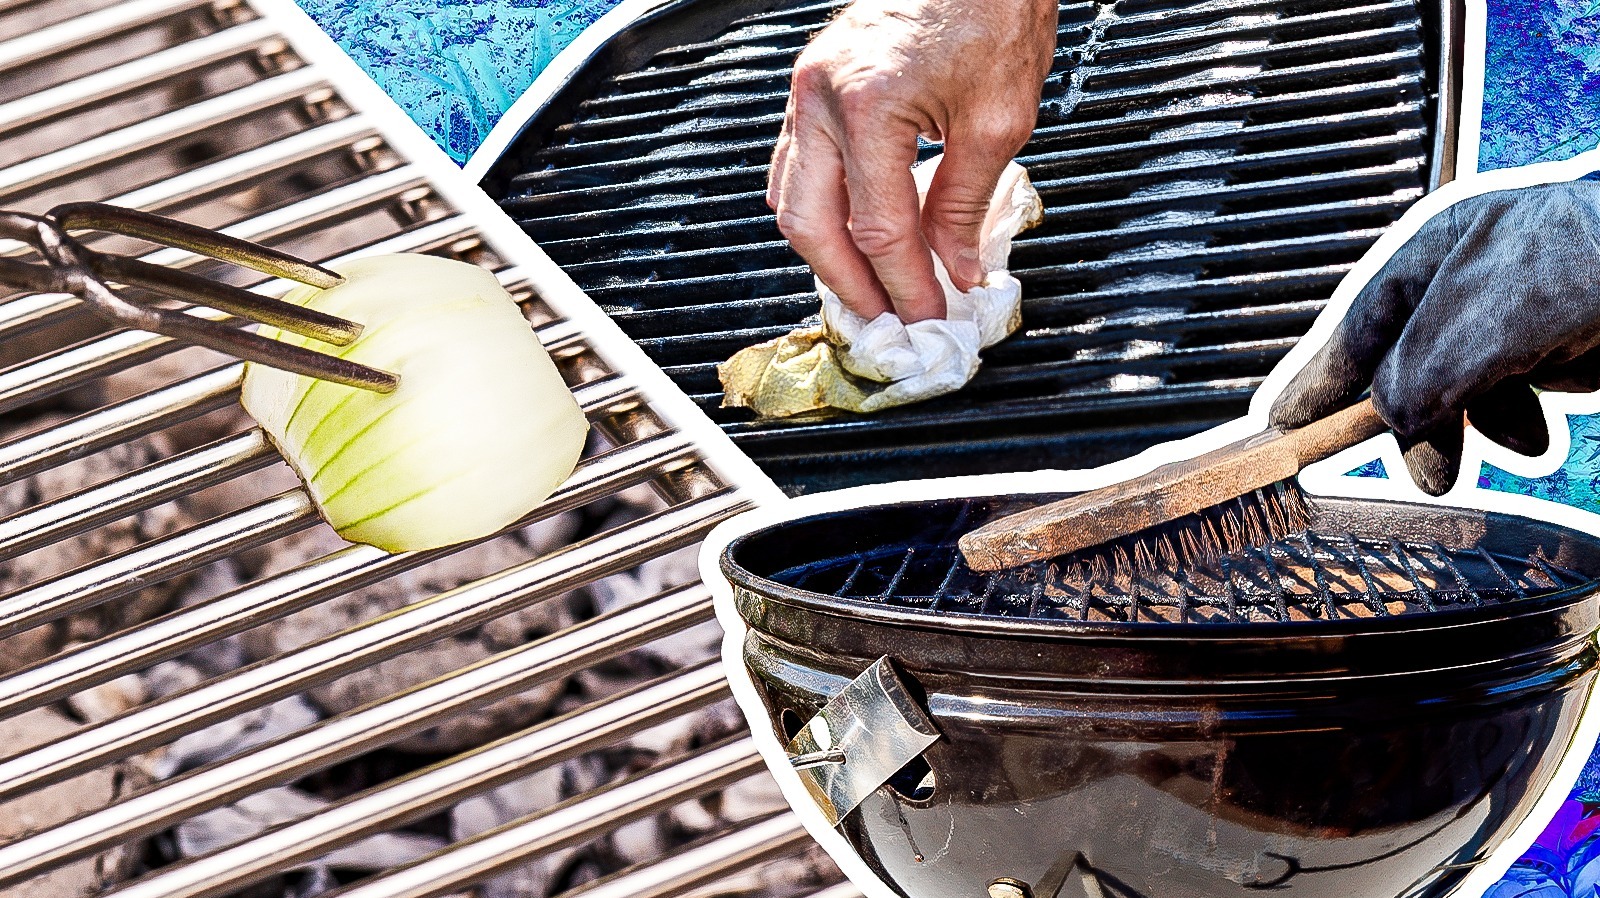 https://www.tastingtable.com/img/gallery/9-essential-tips-and-tricks-for-cleaning-your-grill/l-intro-1686948761.jpg